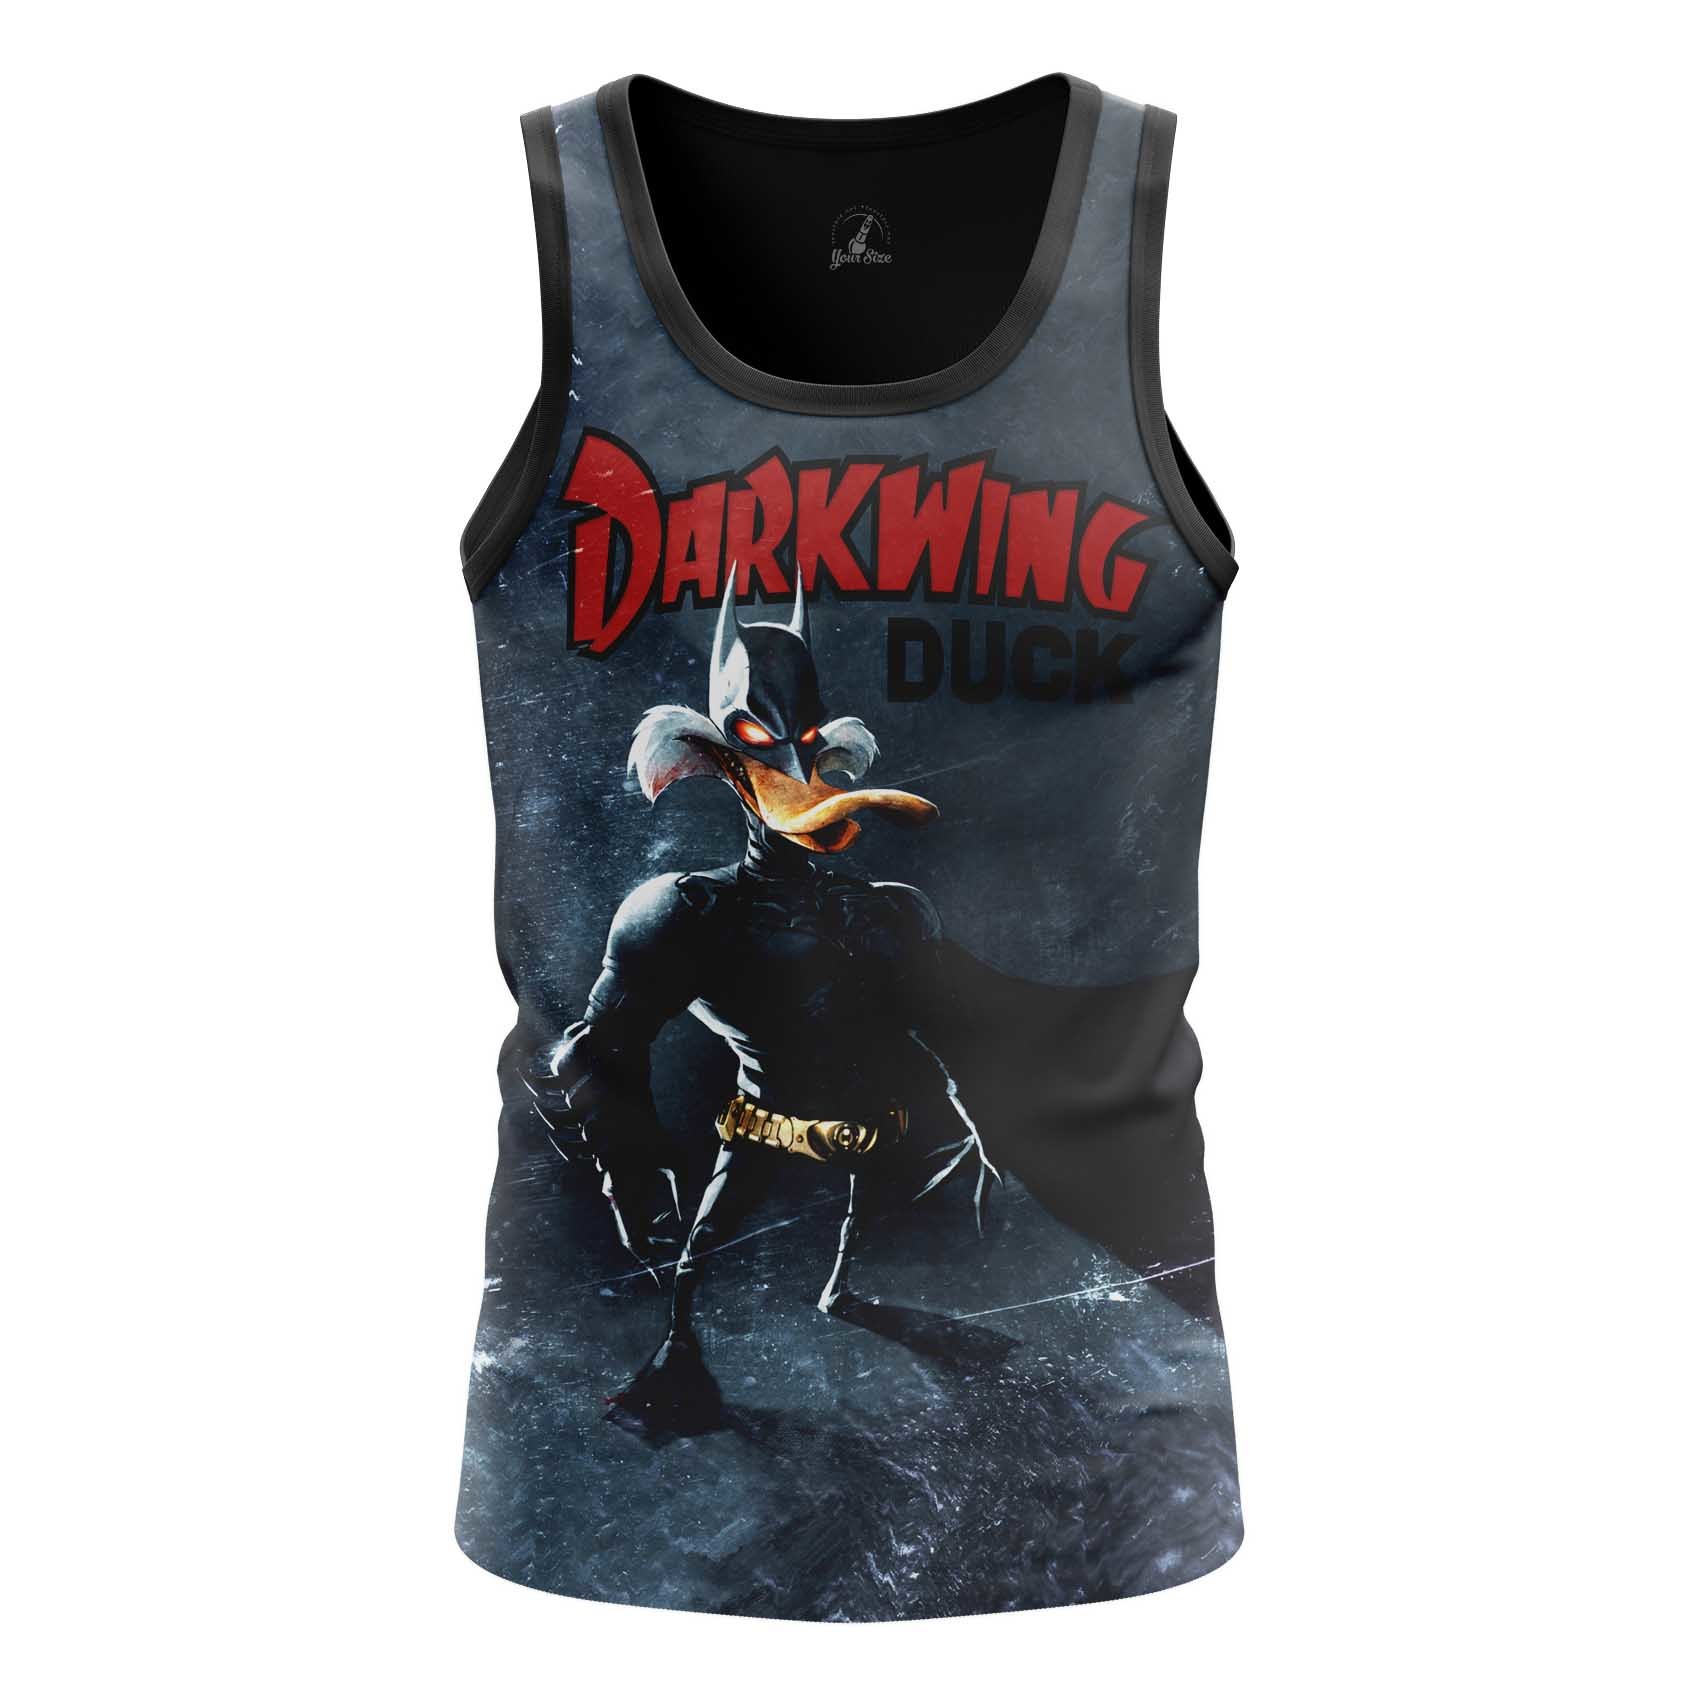 Men’s t-shirt Darkwing Duck Disney Animated Idolstore - Merchandise and Collectibles Merchandise, Toys and Collectibles